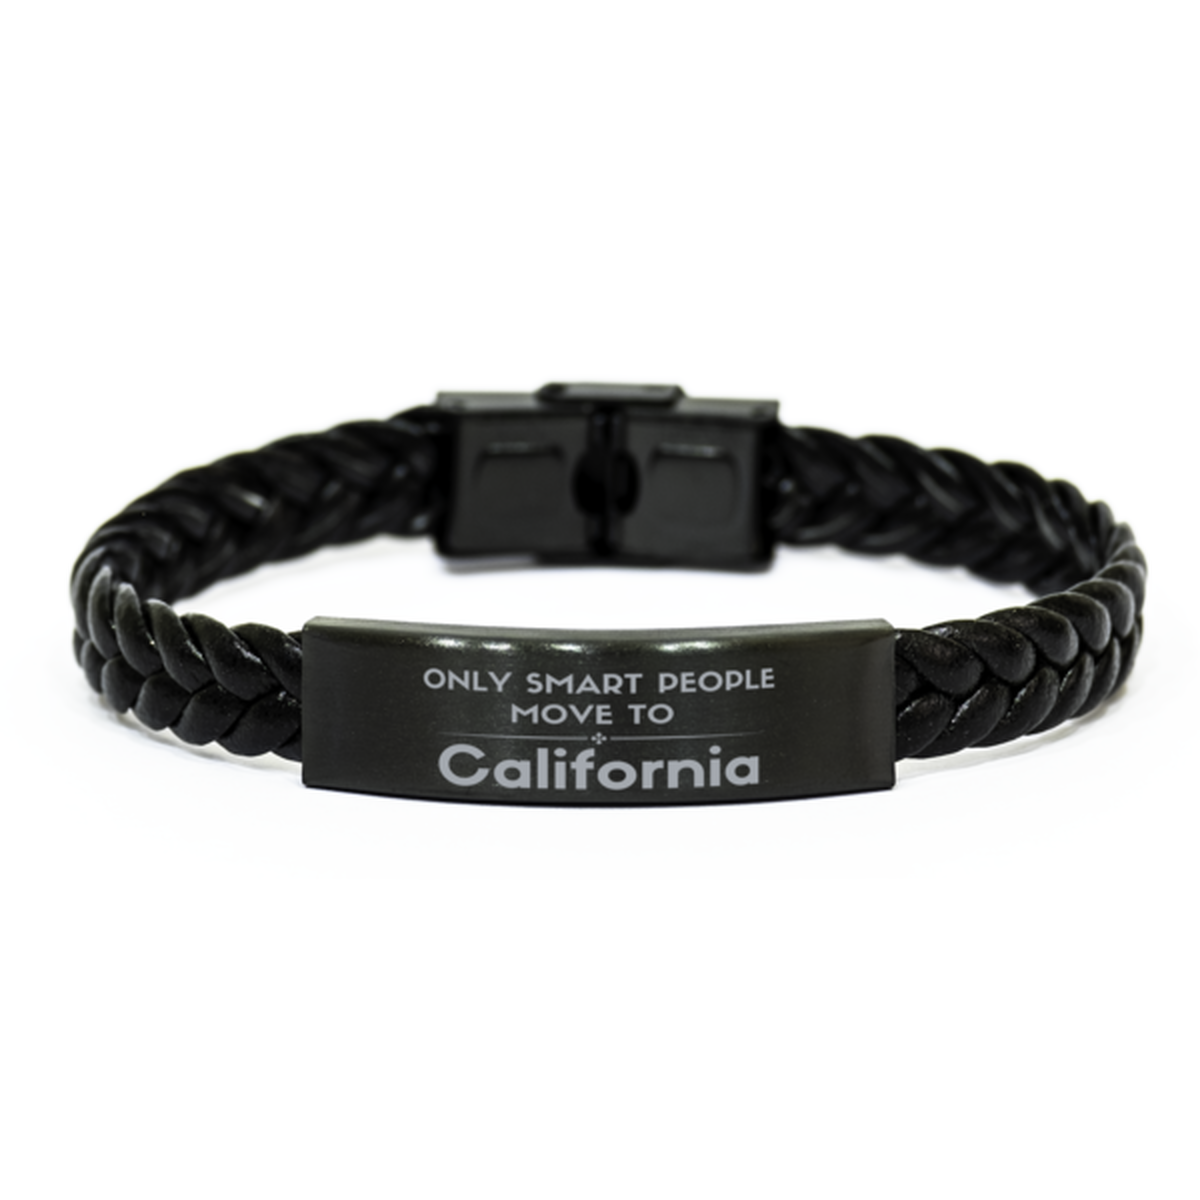 Only smart people move to California Braided Leather Bracelet, Gag Gifts For California, Move to California Gifts for Friends Coworker Funny Saying Quote